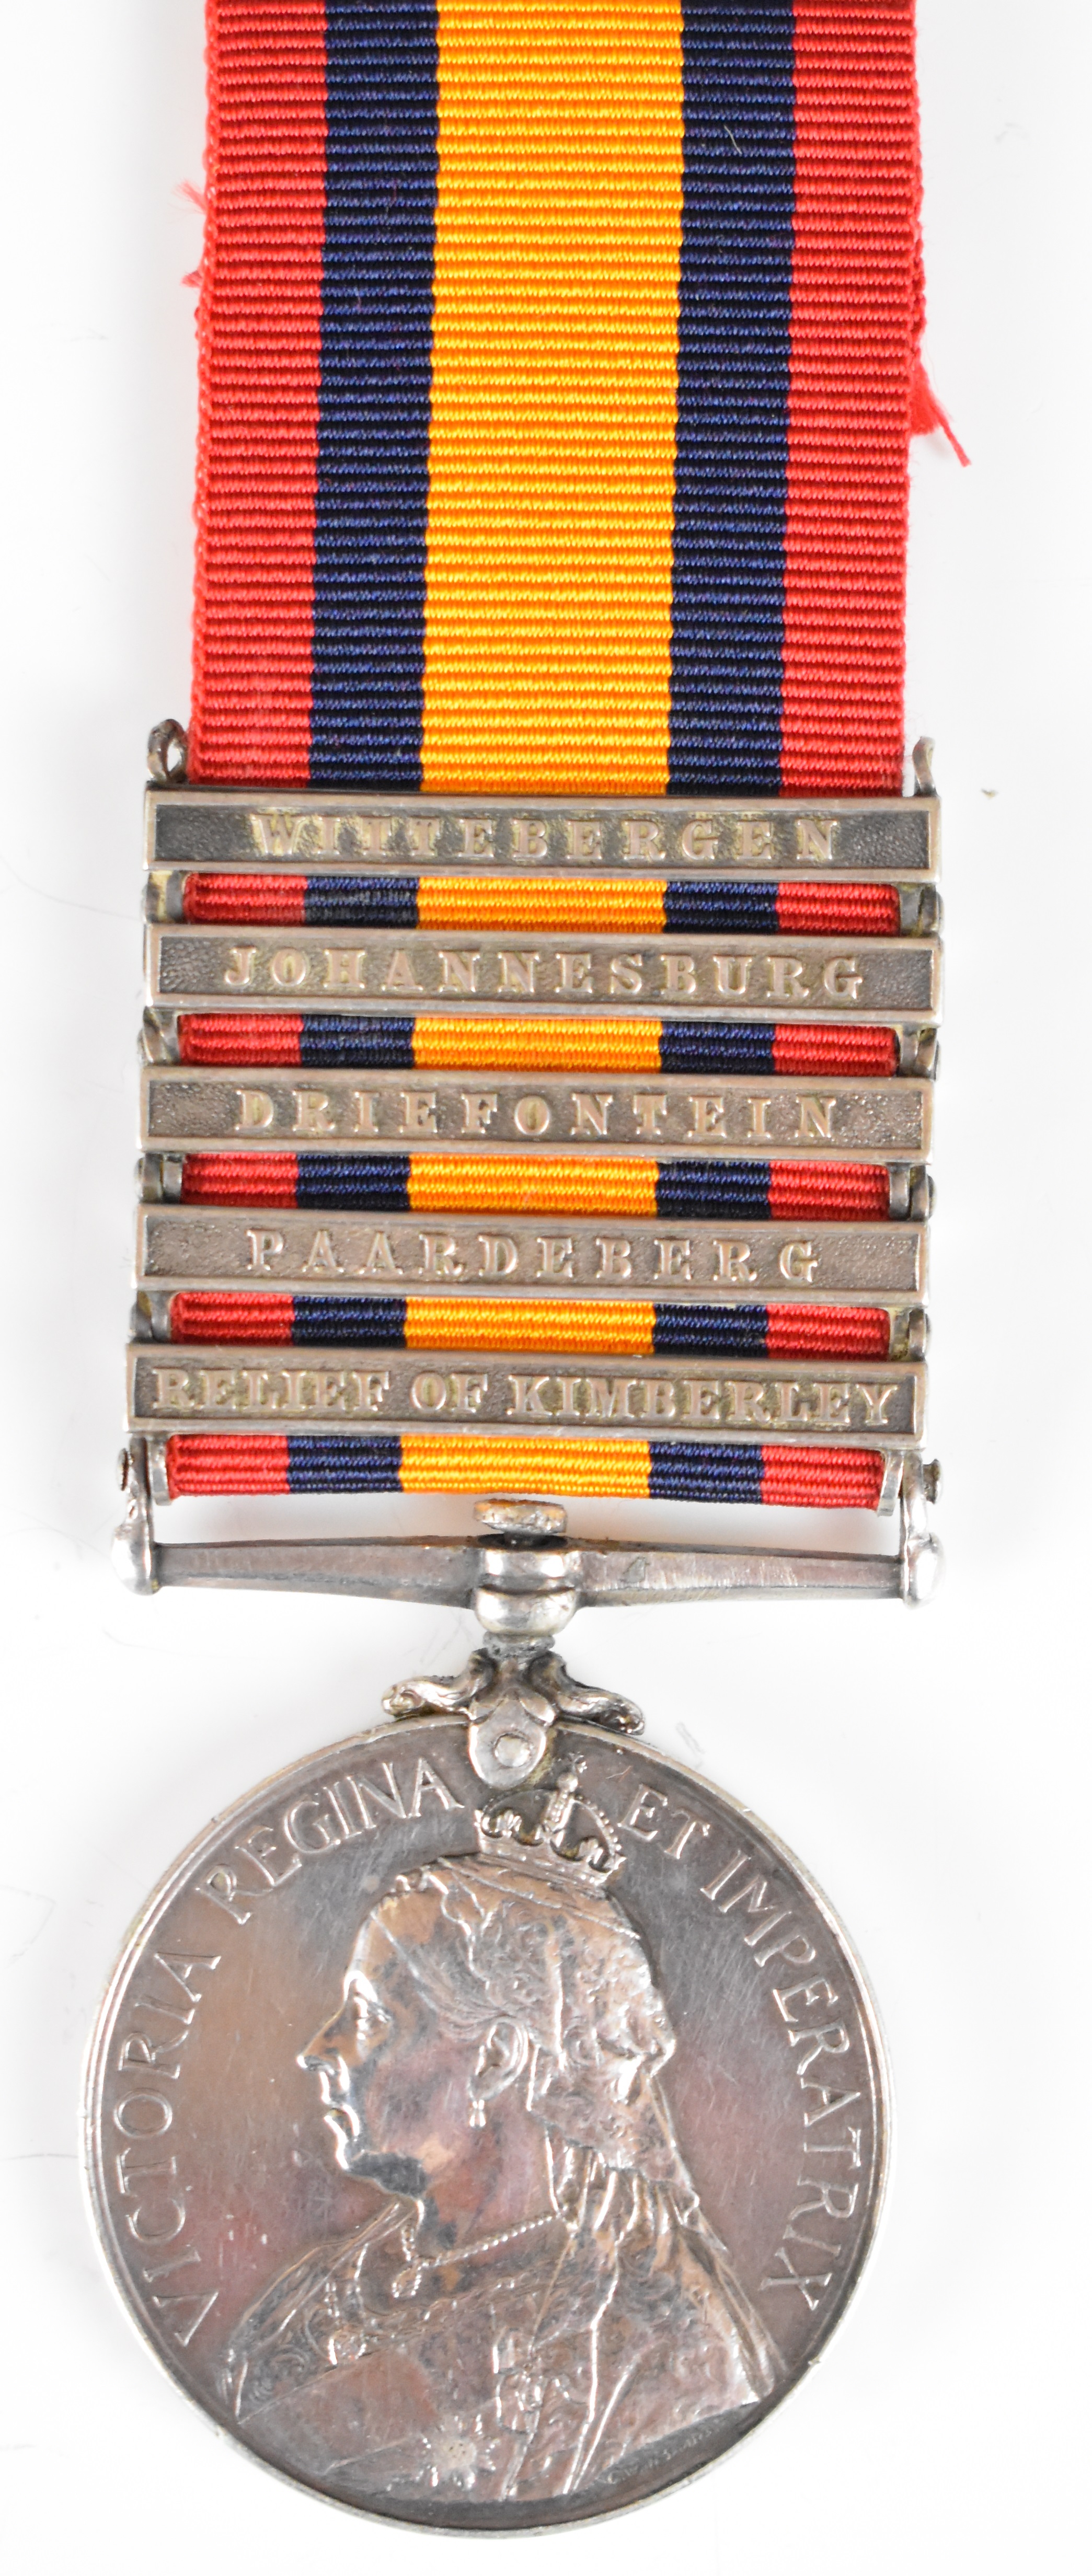 Queen's South Africa Medal with clasps for Relief of Kimberley, Paardeberg, Driefontien,